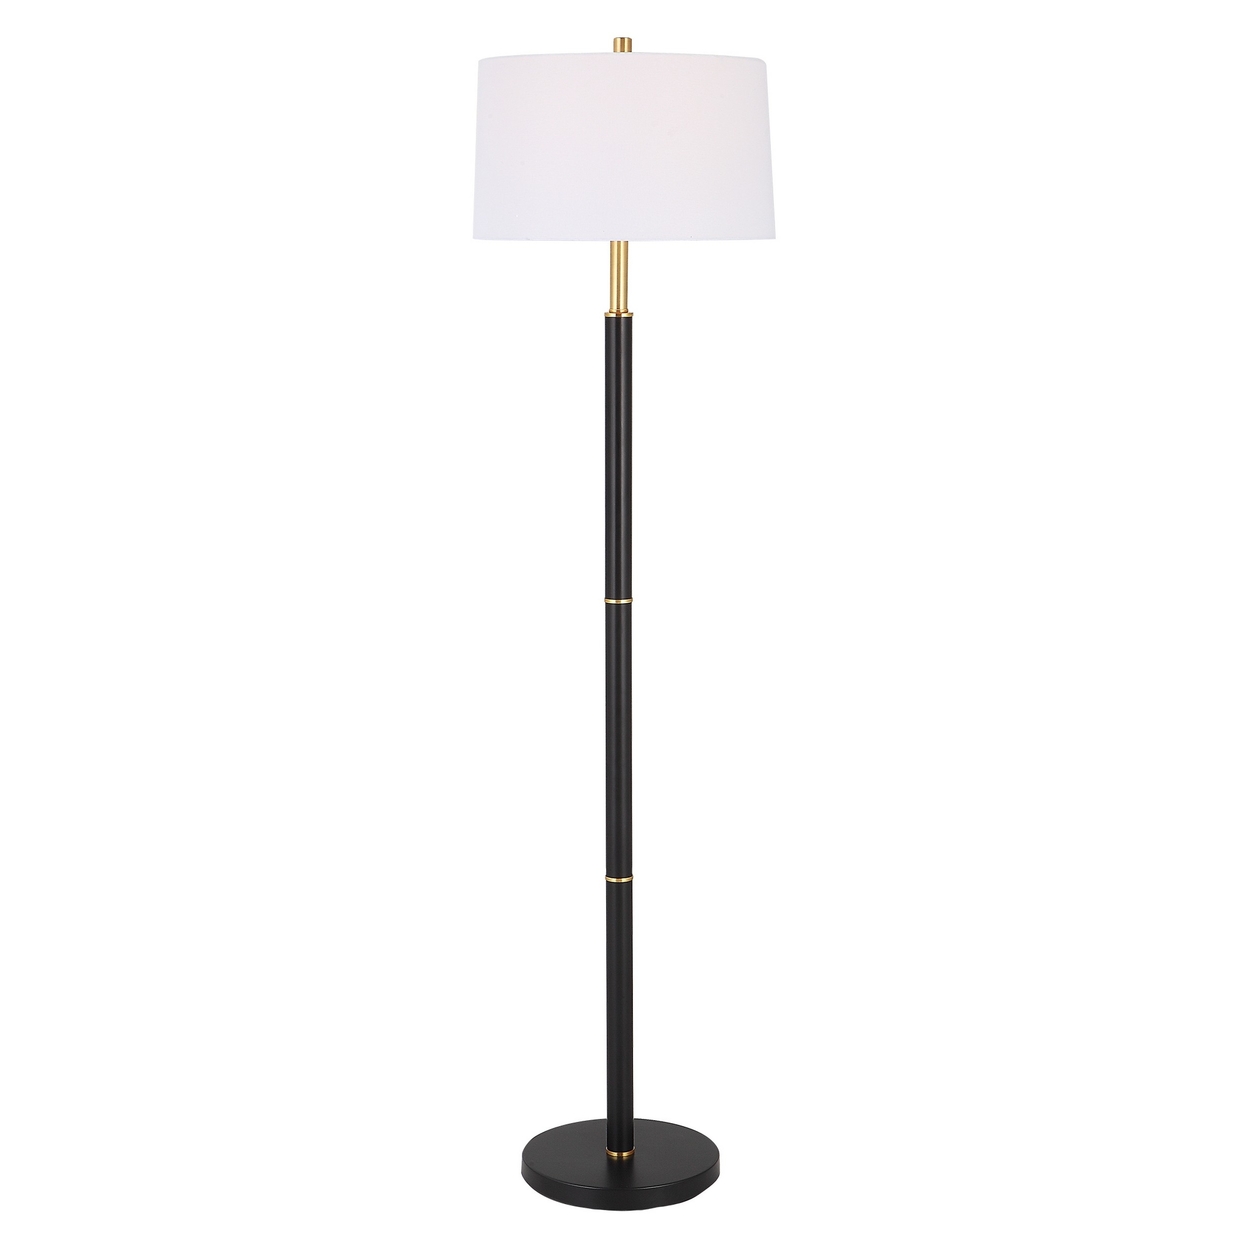 62 Inch Floor Lamp, White Tapered Hardback Shade, Black With Gold Accents -Saltoro Sherpi